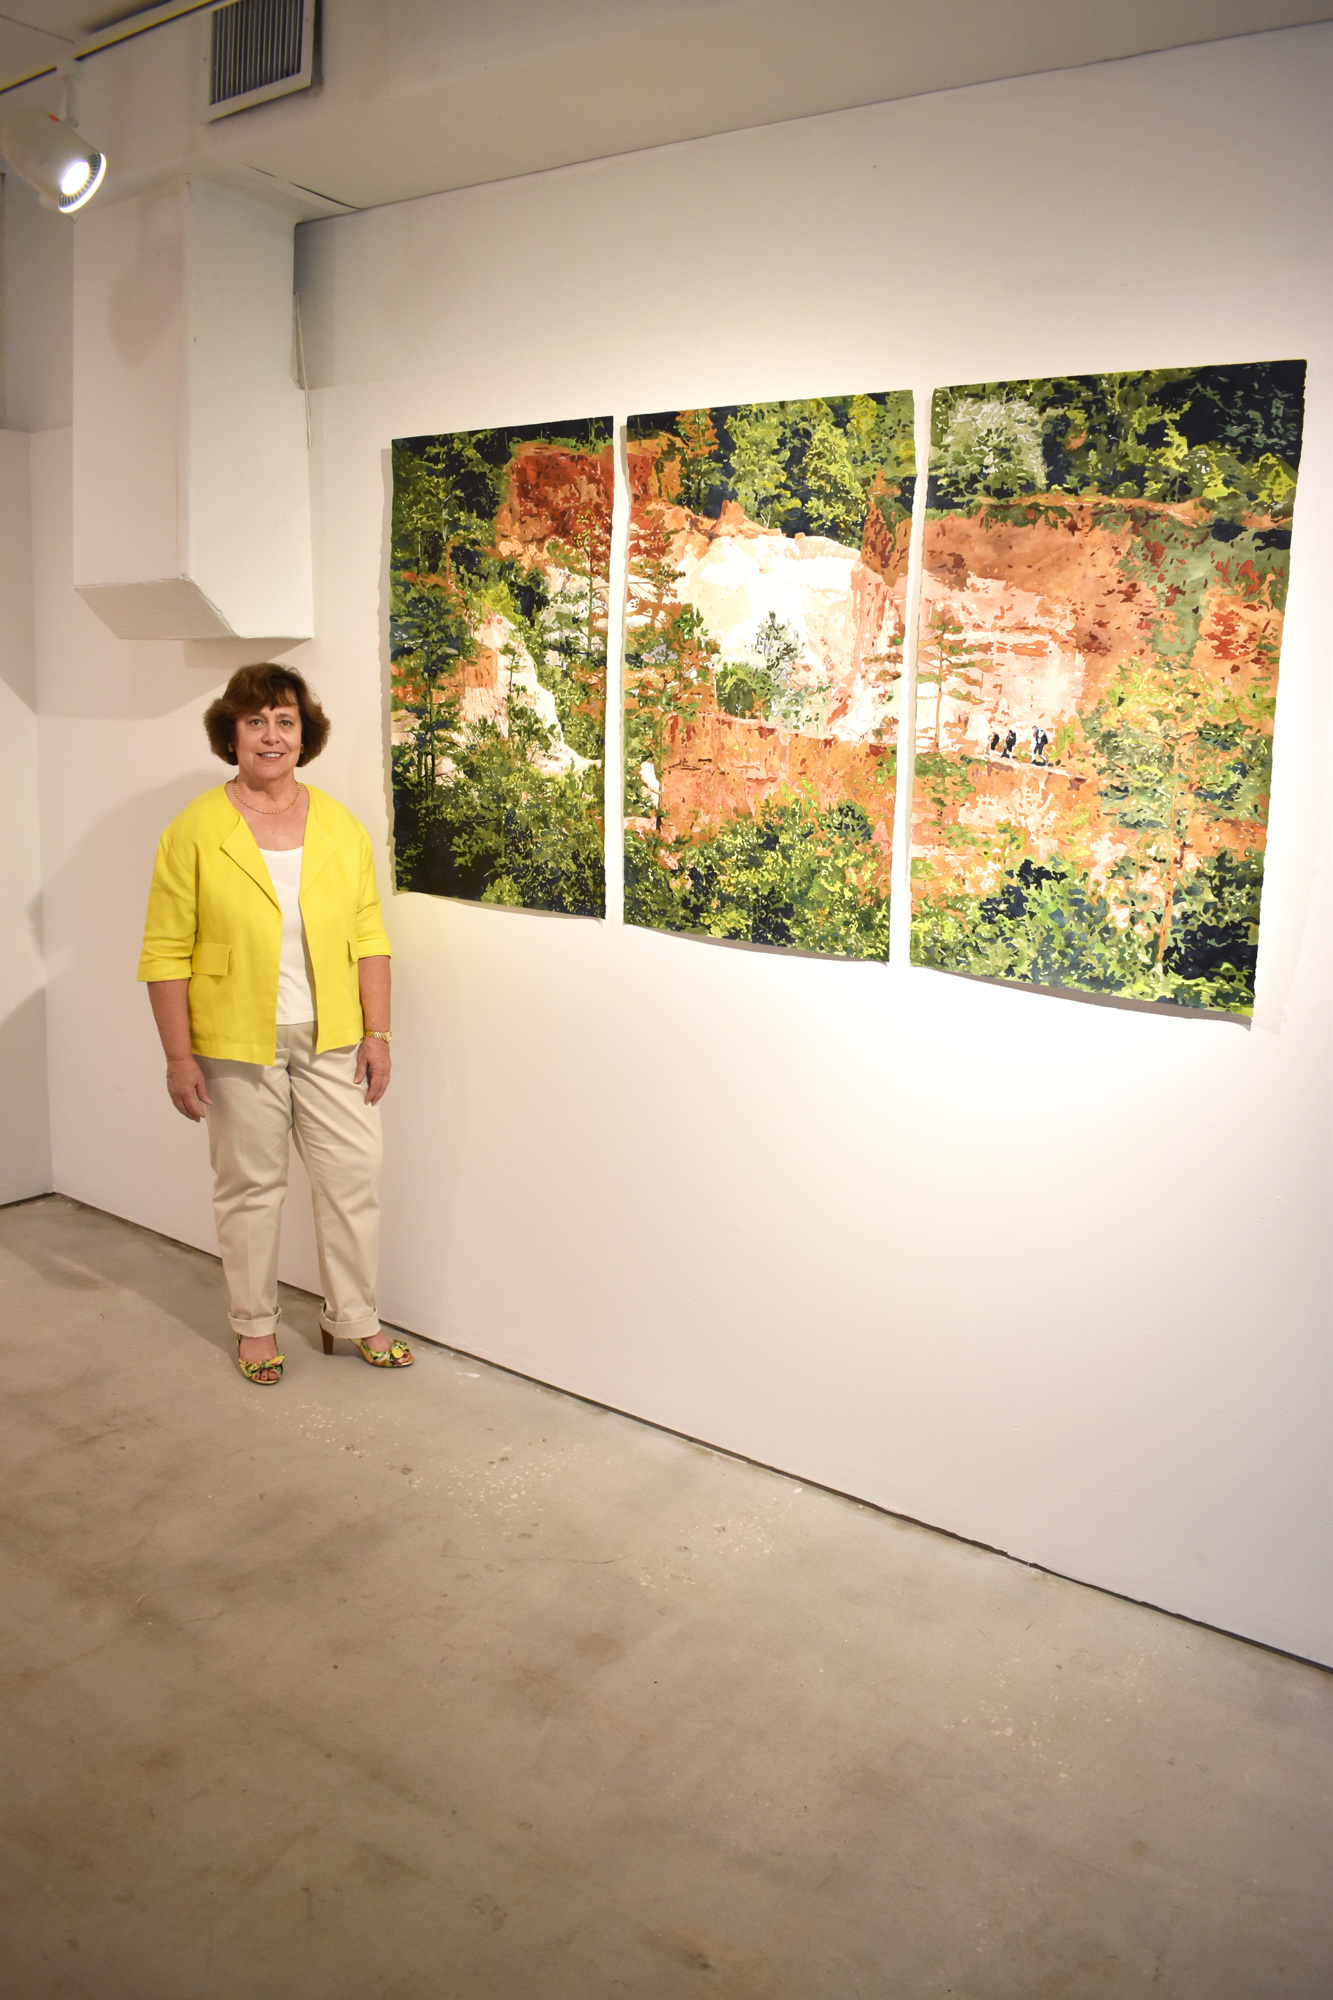 Judy Saltzman has competed in several national competitions and won first place awards from the Suncoast Watercolor Society, Florida Watercolor Society and more. Photo by Niki Kottmann